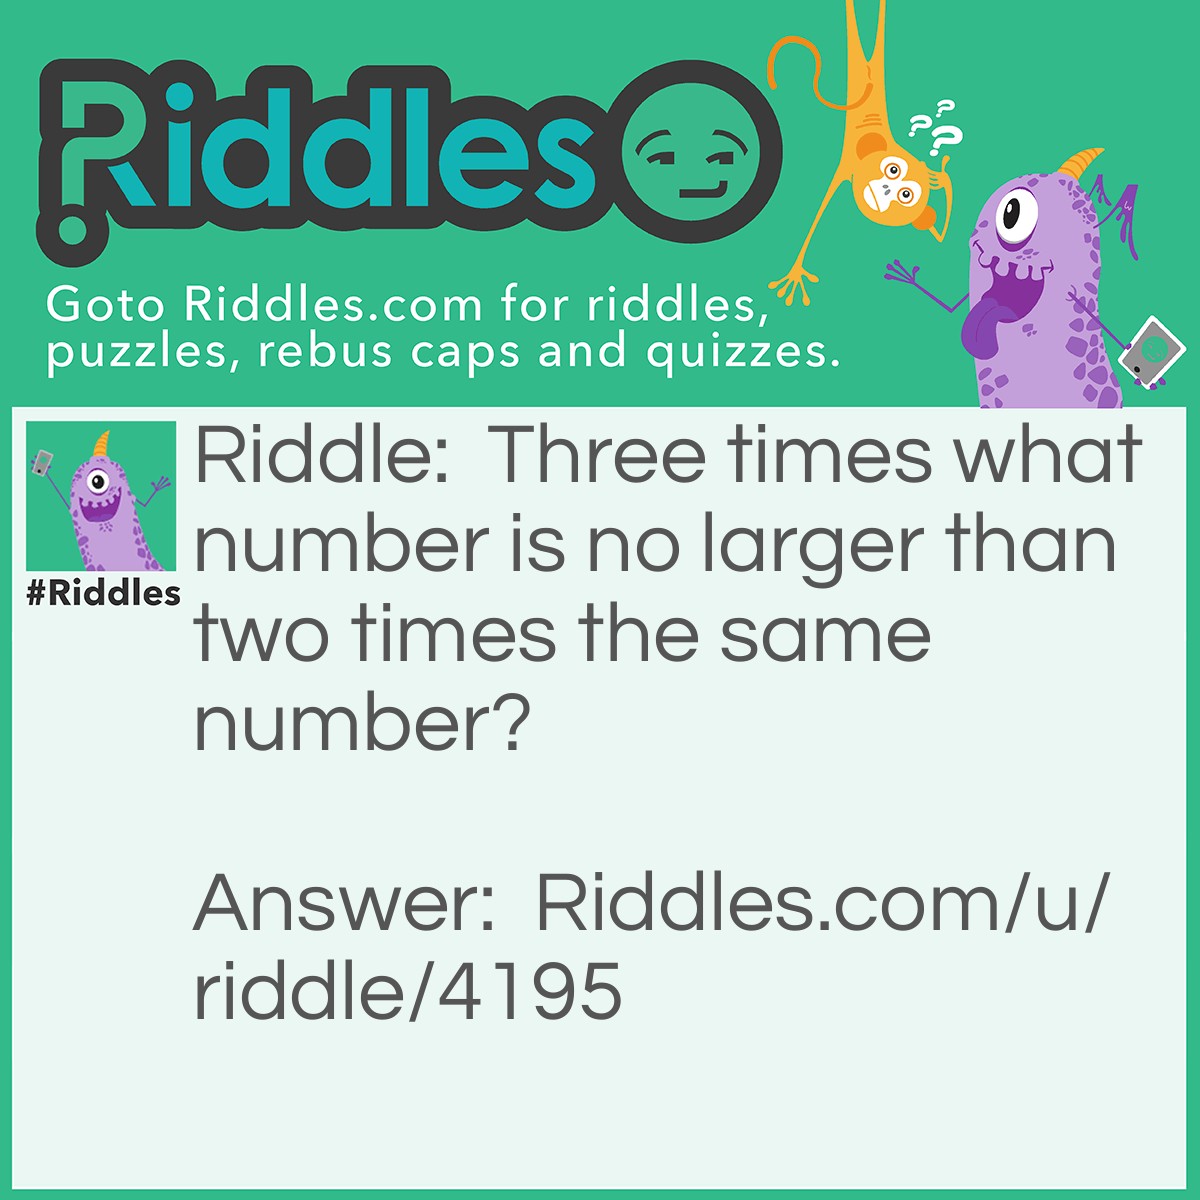 Riddle: Three times what number is no larger than two times the same number? Answer: 0